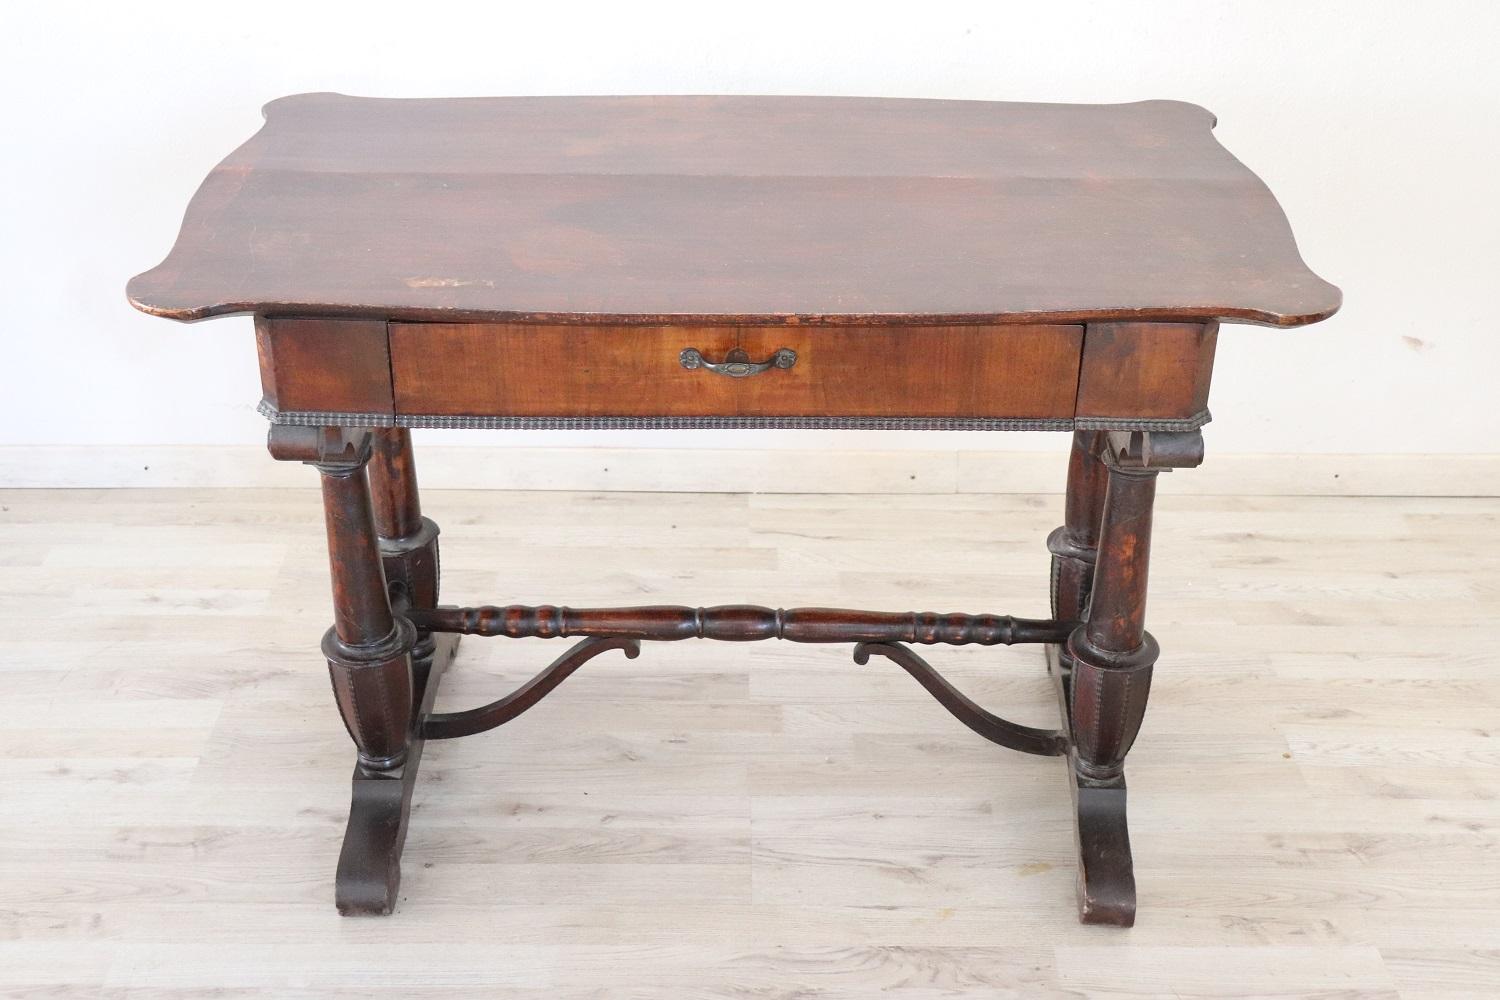 Elegant and essential antique Italian writing desk. The desk is made of solid walnut wood. Important turned and carved legs. Plenty of space for your writing needs and one comfortable large drawer on the front.